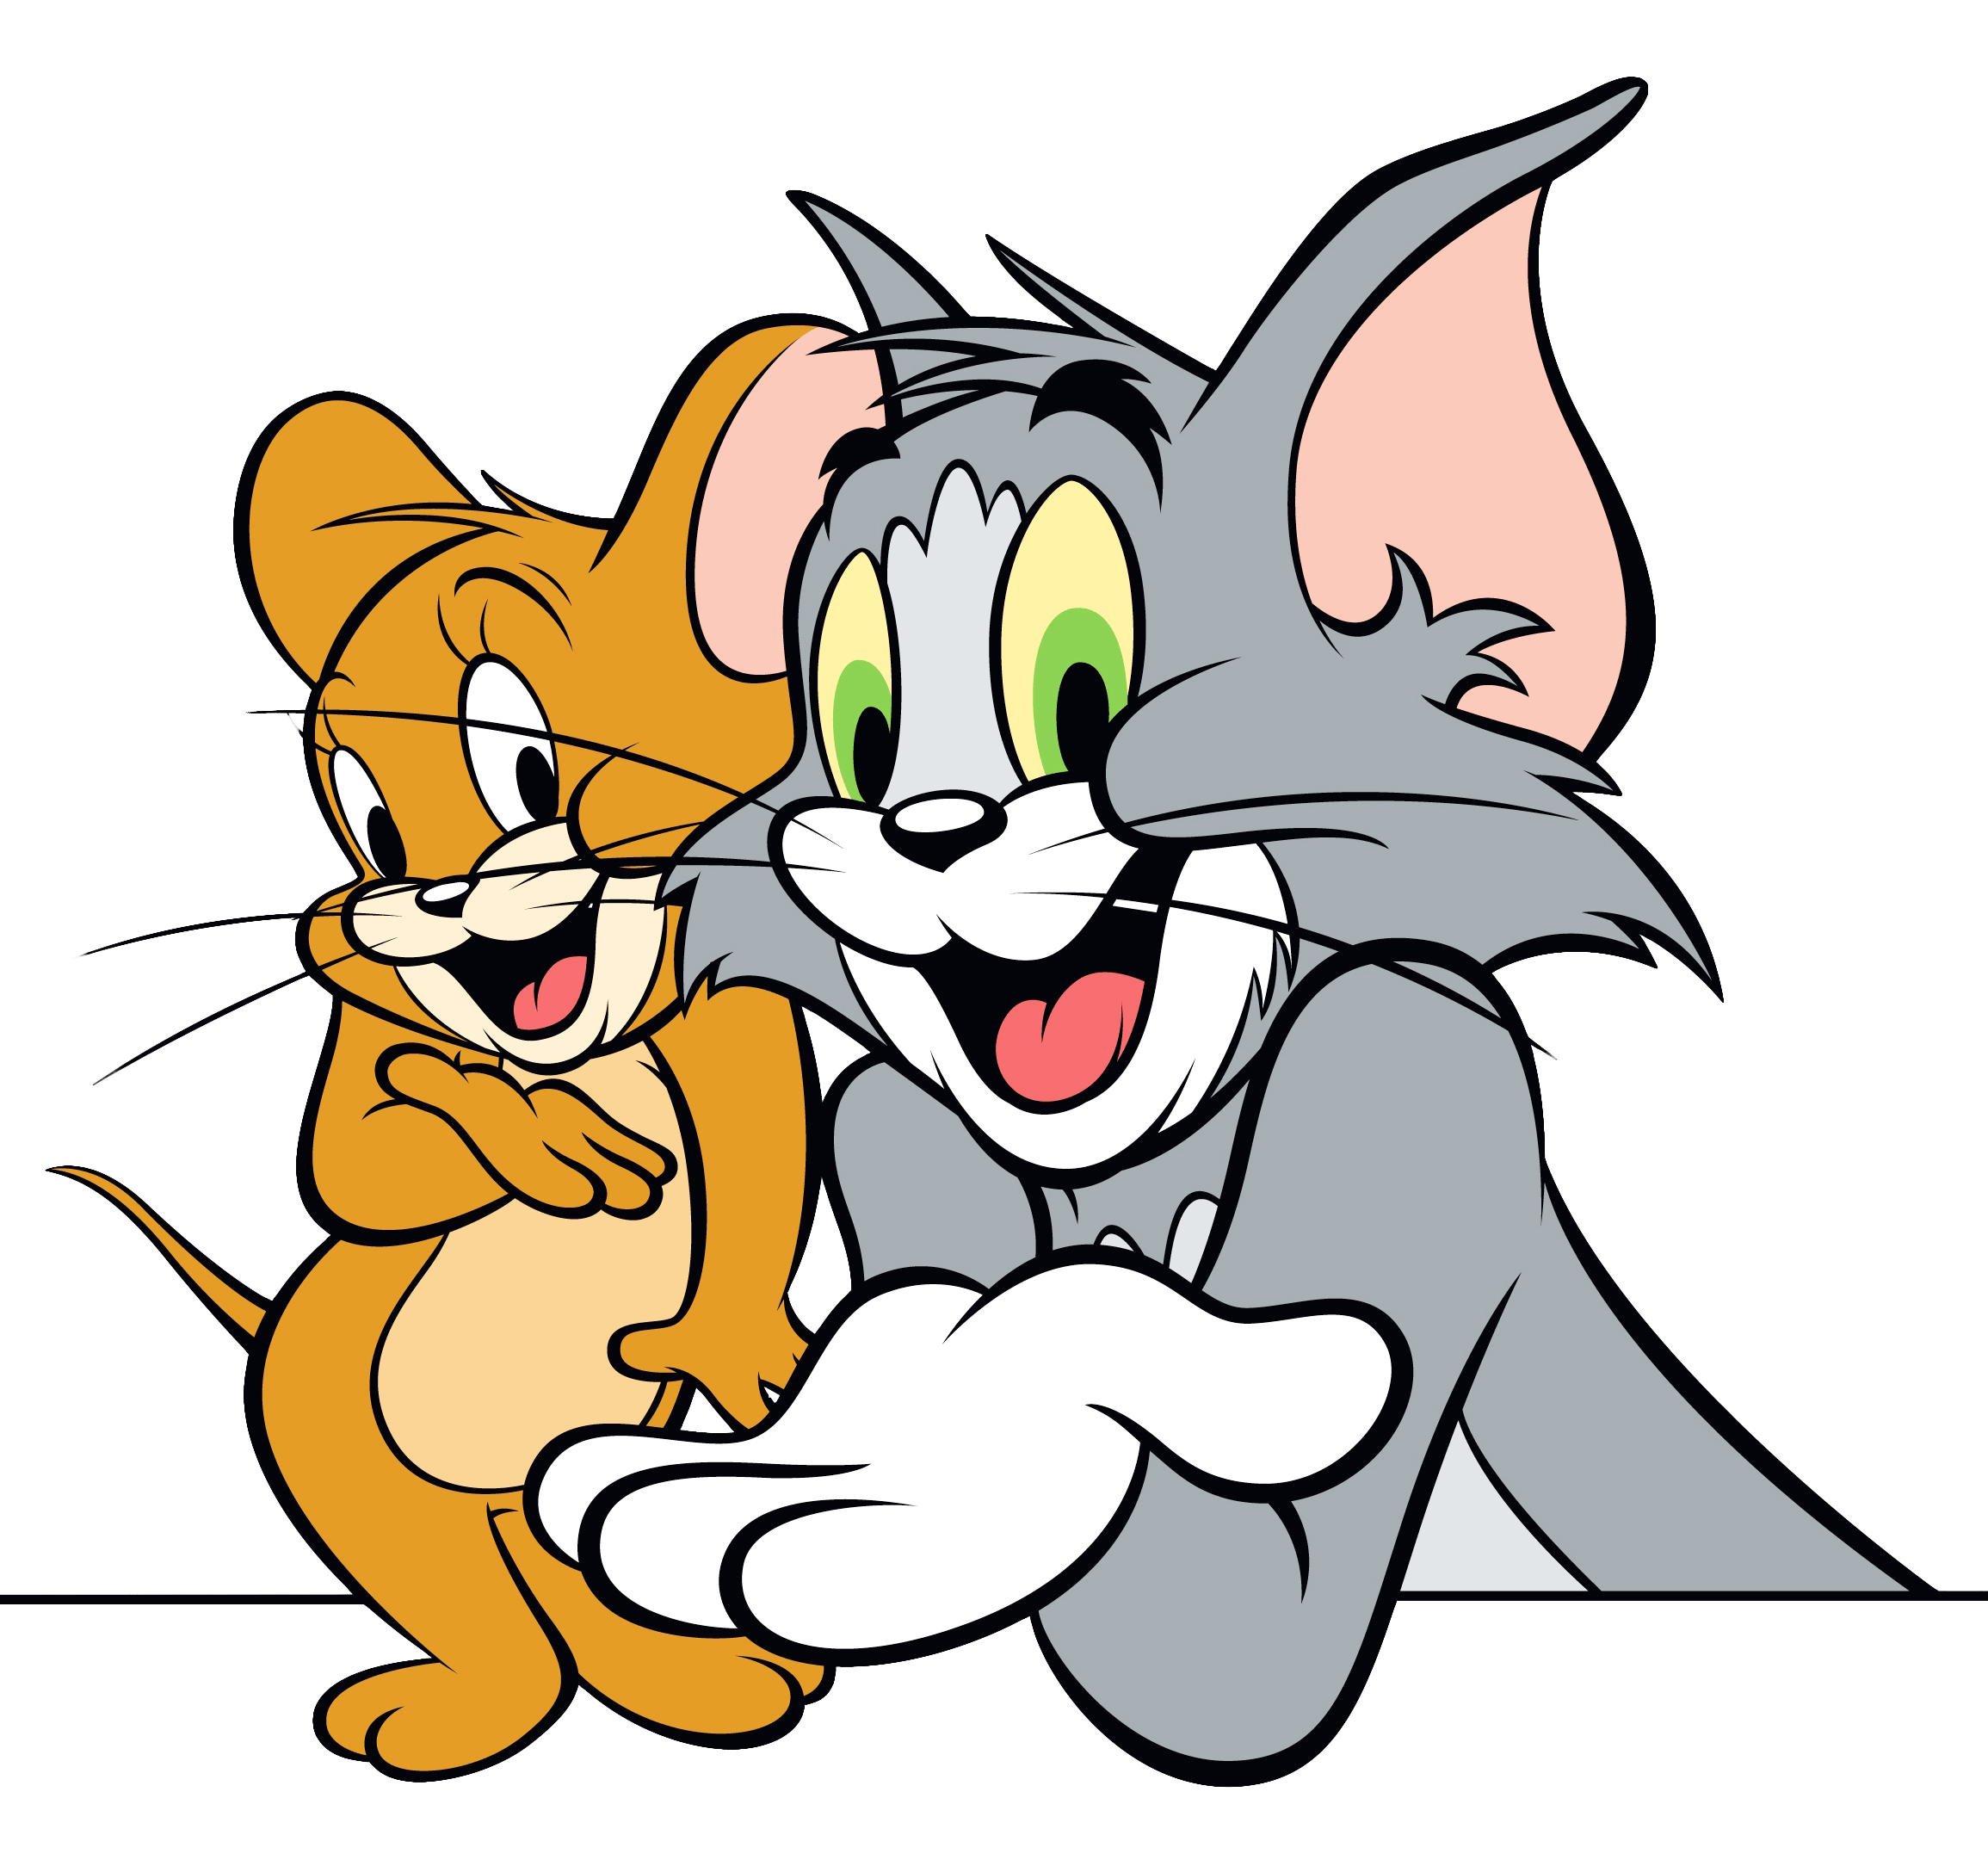 Tom and Jerry Logo - Tom And Jerry PNG Transparent Tom And Jerry.PNG Images. | PlusPNG